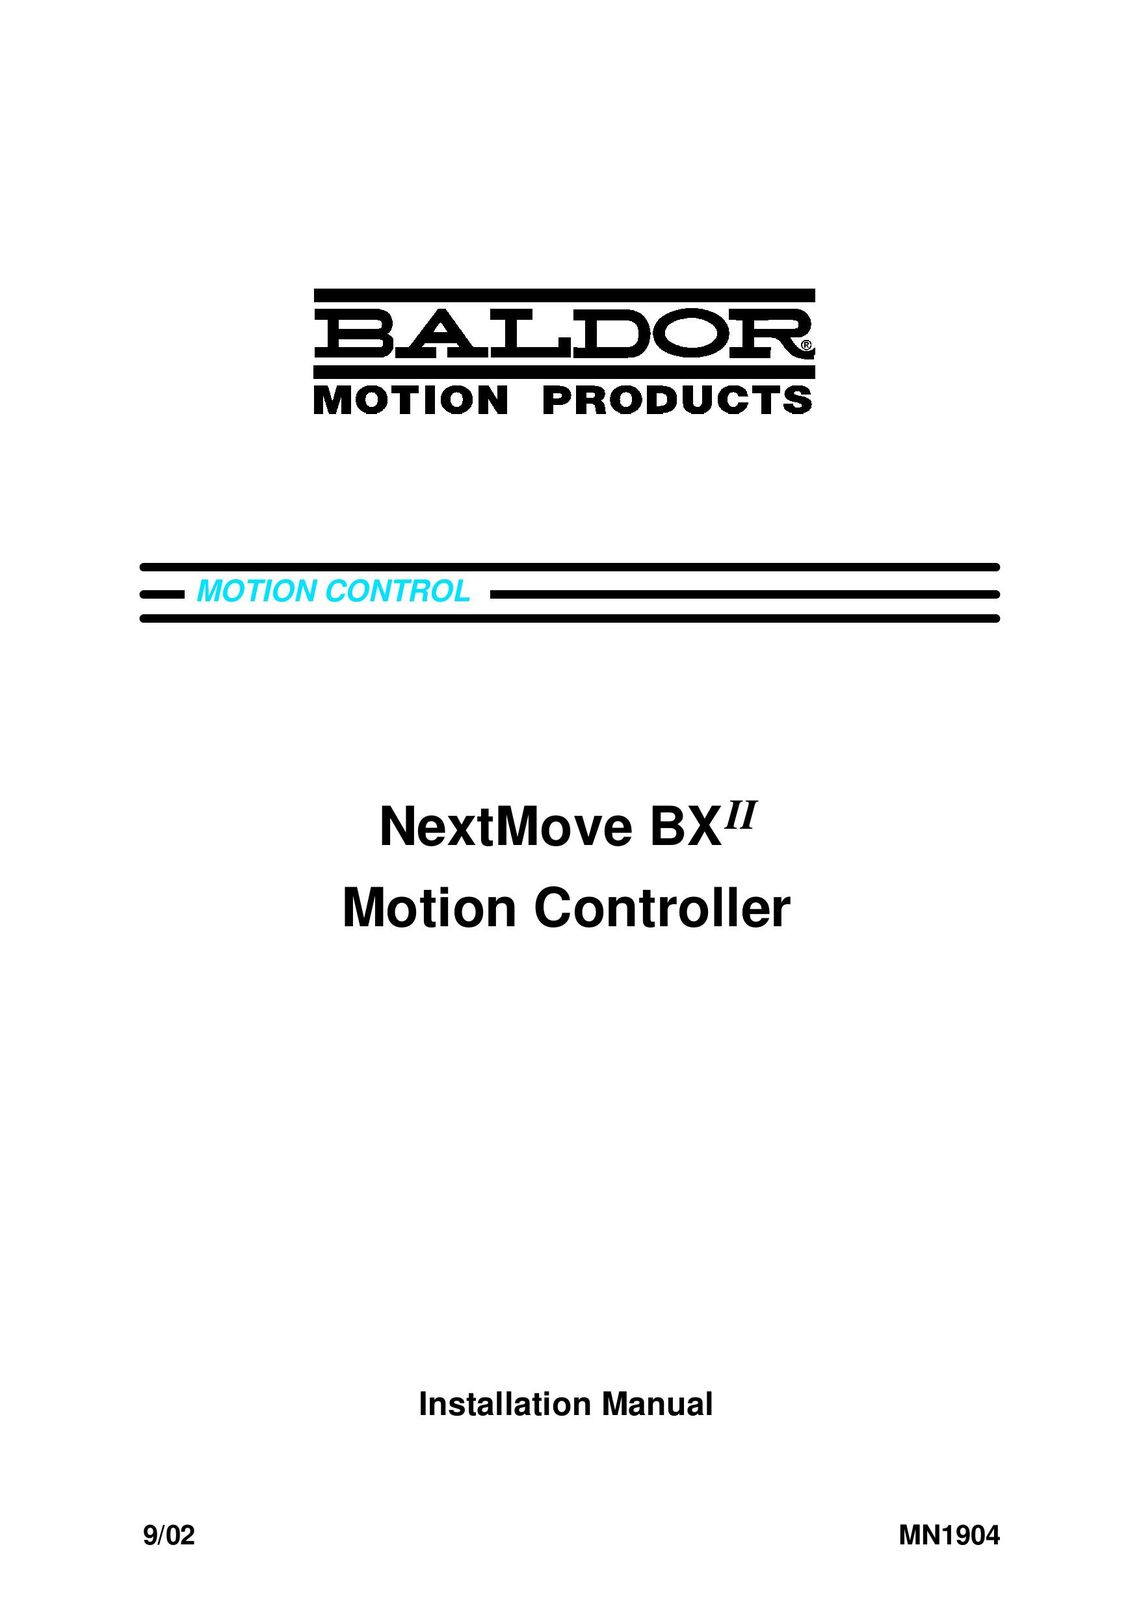 Baldor BXII Home Security System User Manual